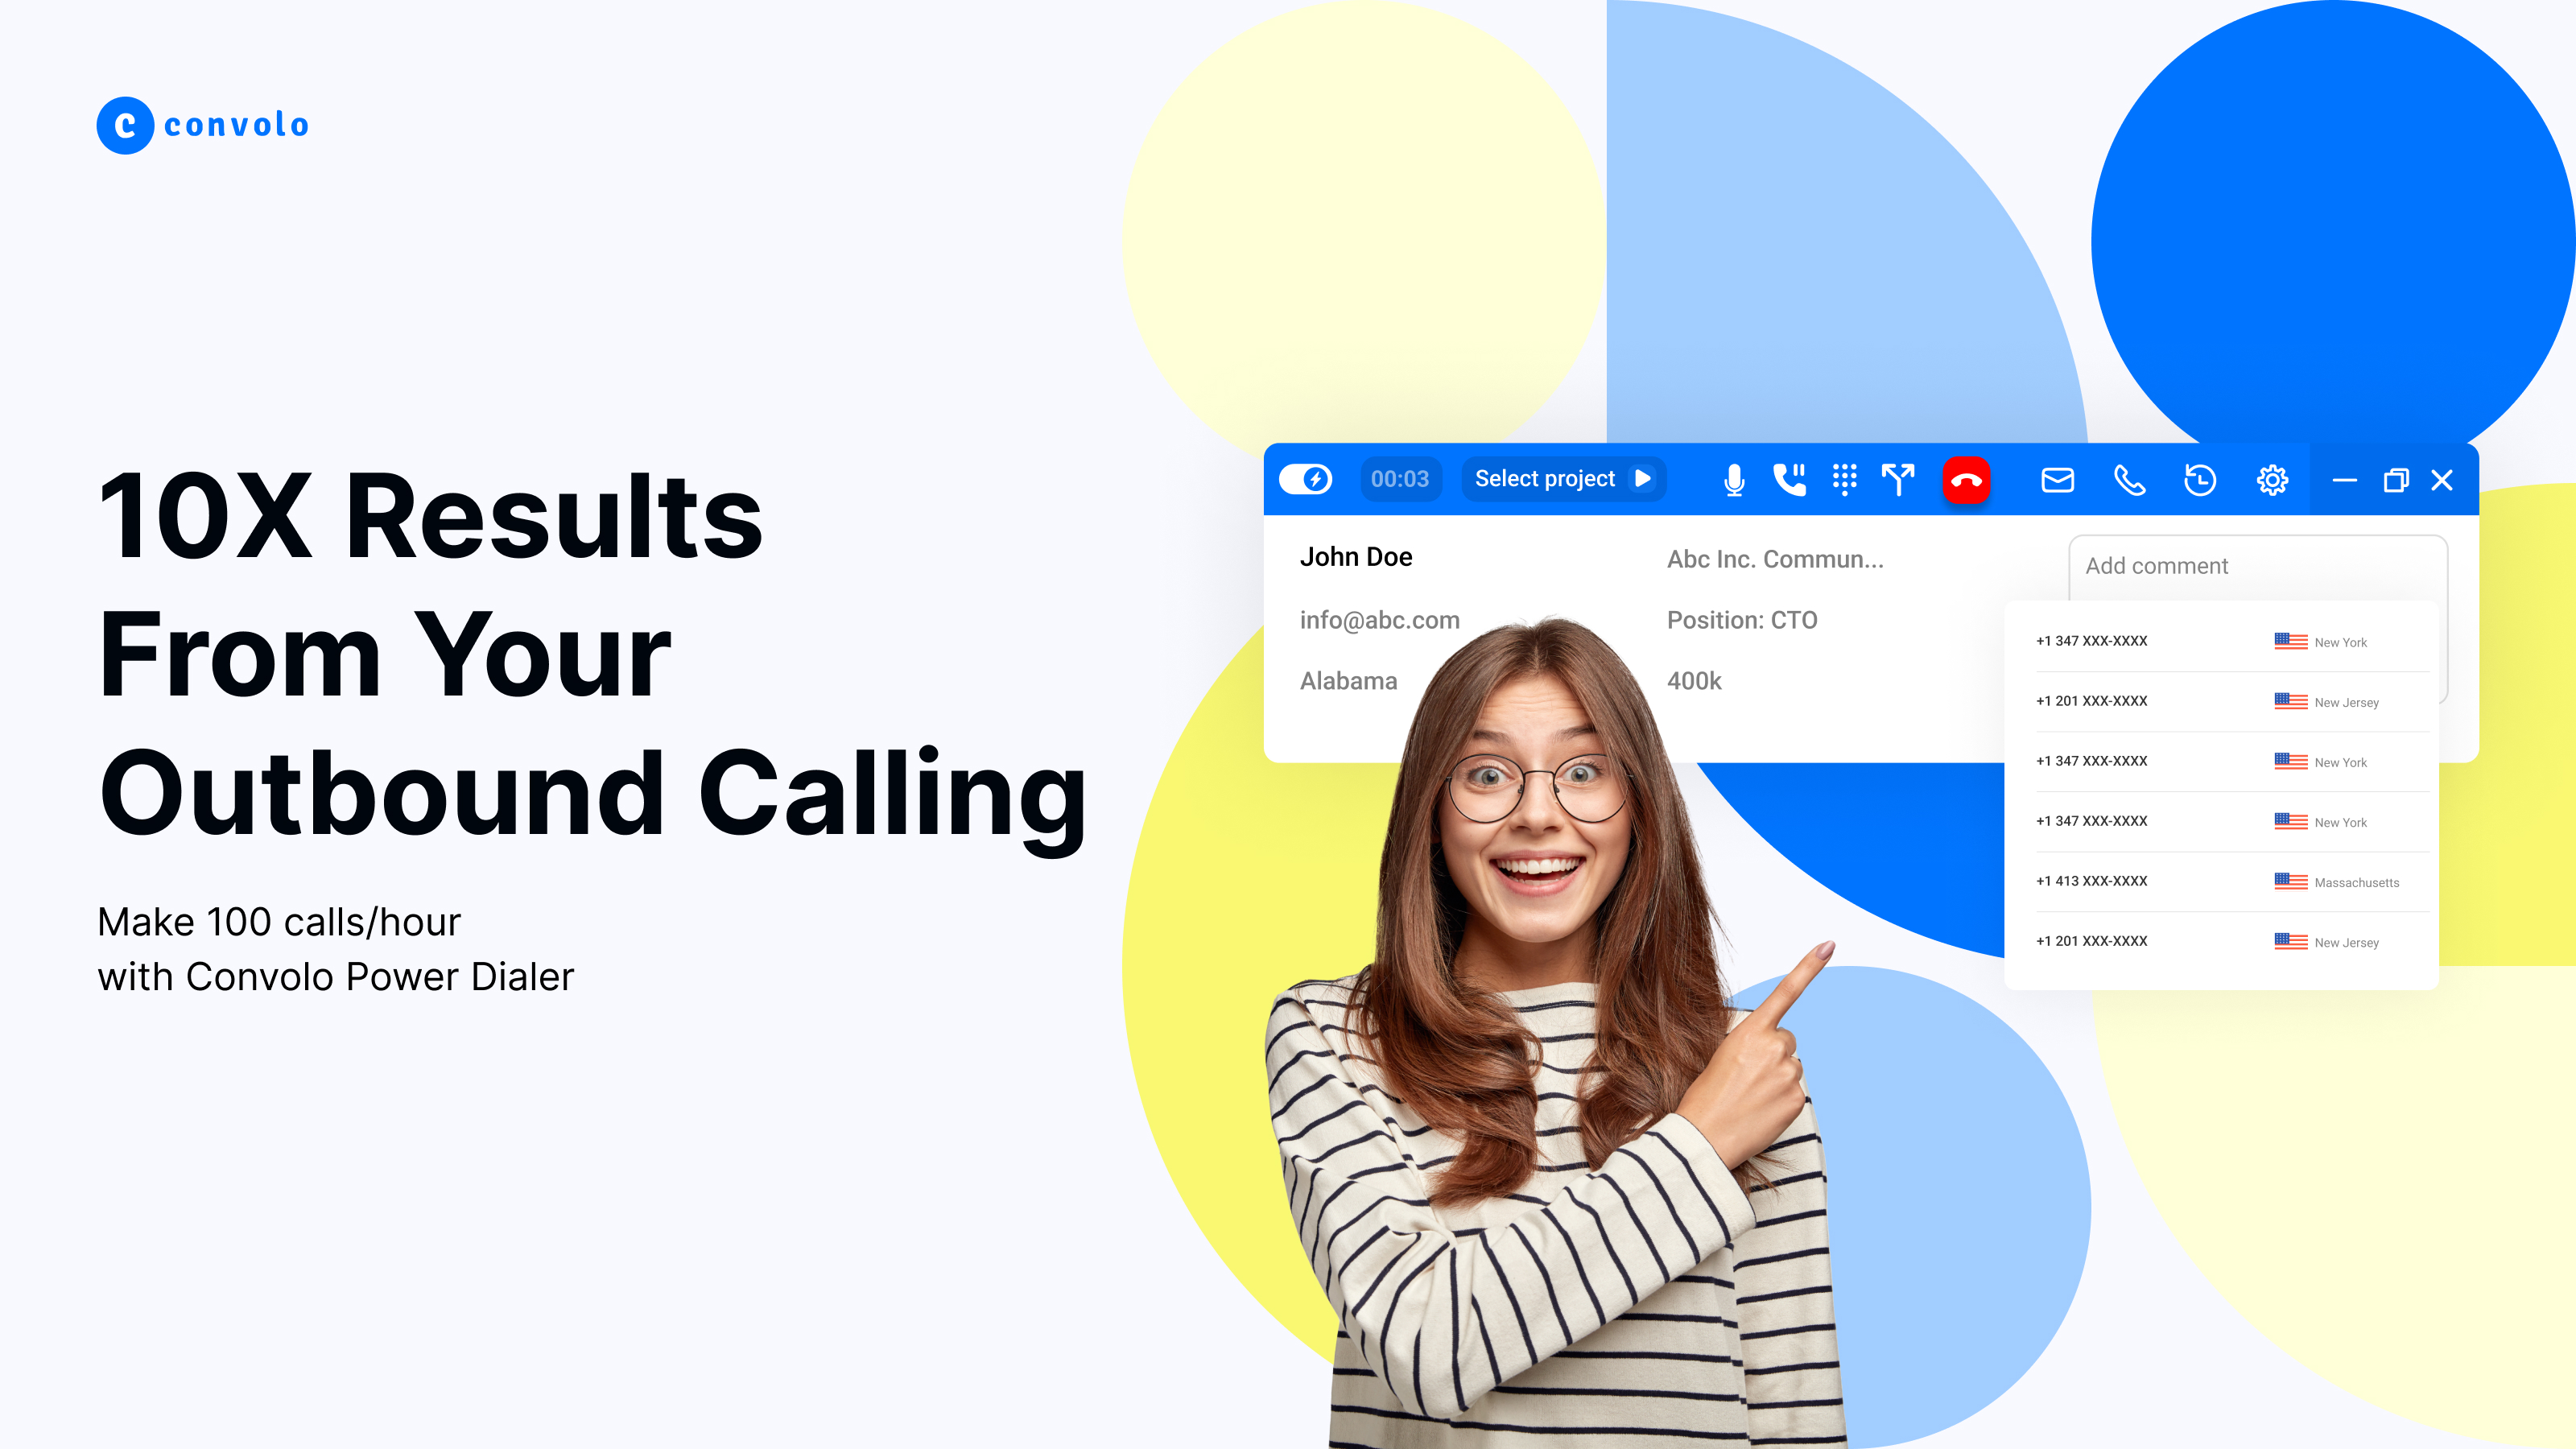 10X Results From Your Outbound Calling